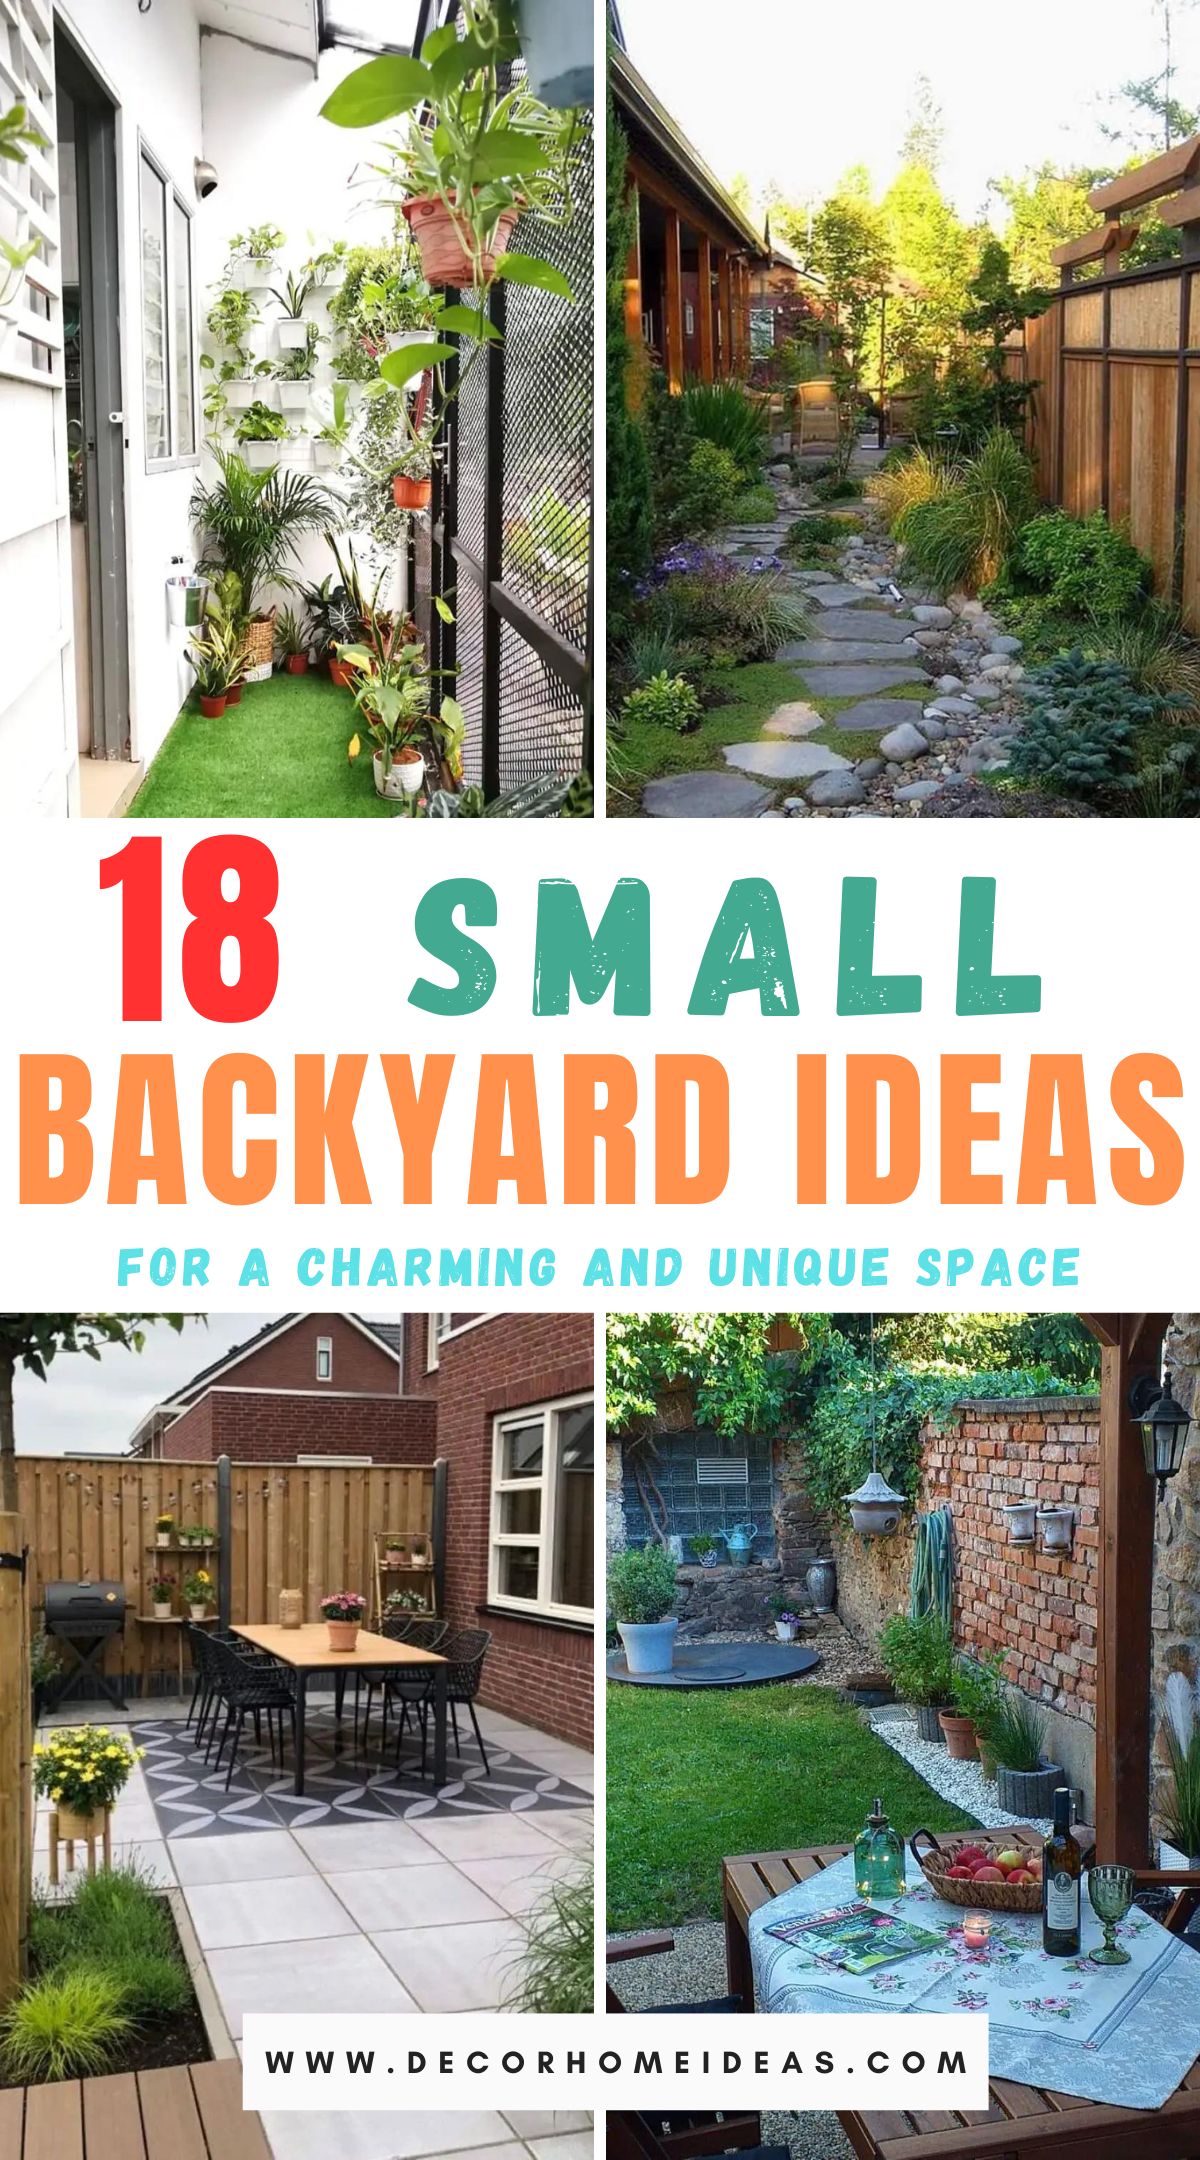 Discover the magic of mini backyard marvels with our collection of 18 chic ideas to transform your outdoor space. From cozy nooks to stylish garden accents, explore creative inspirations that make the most of your compact garden area.